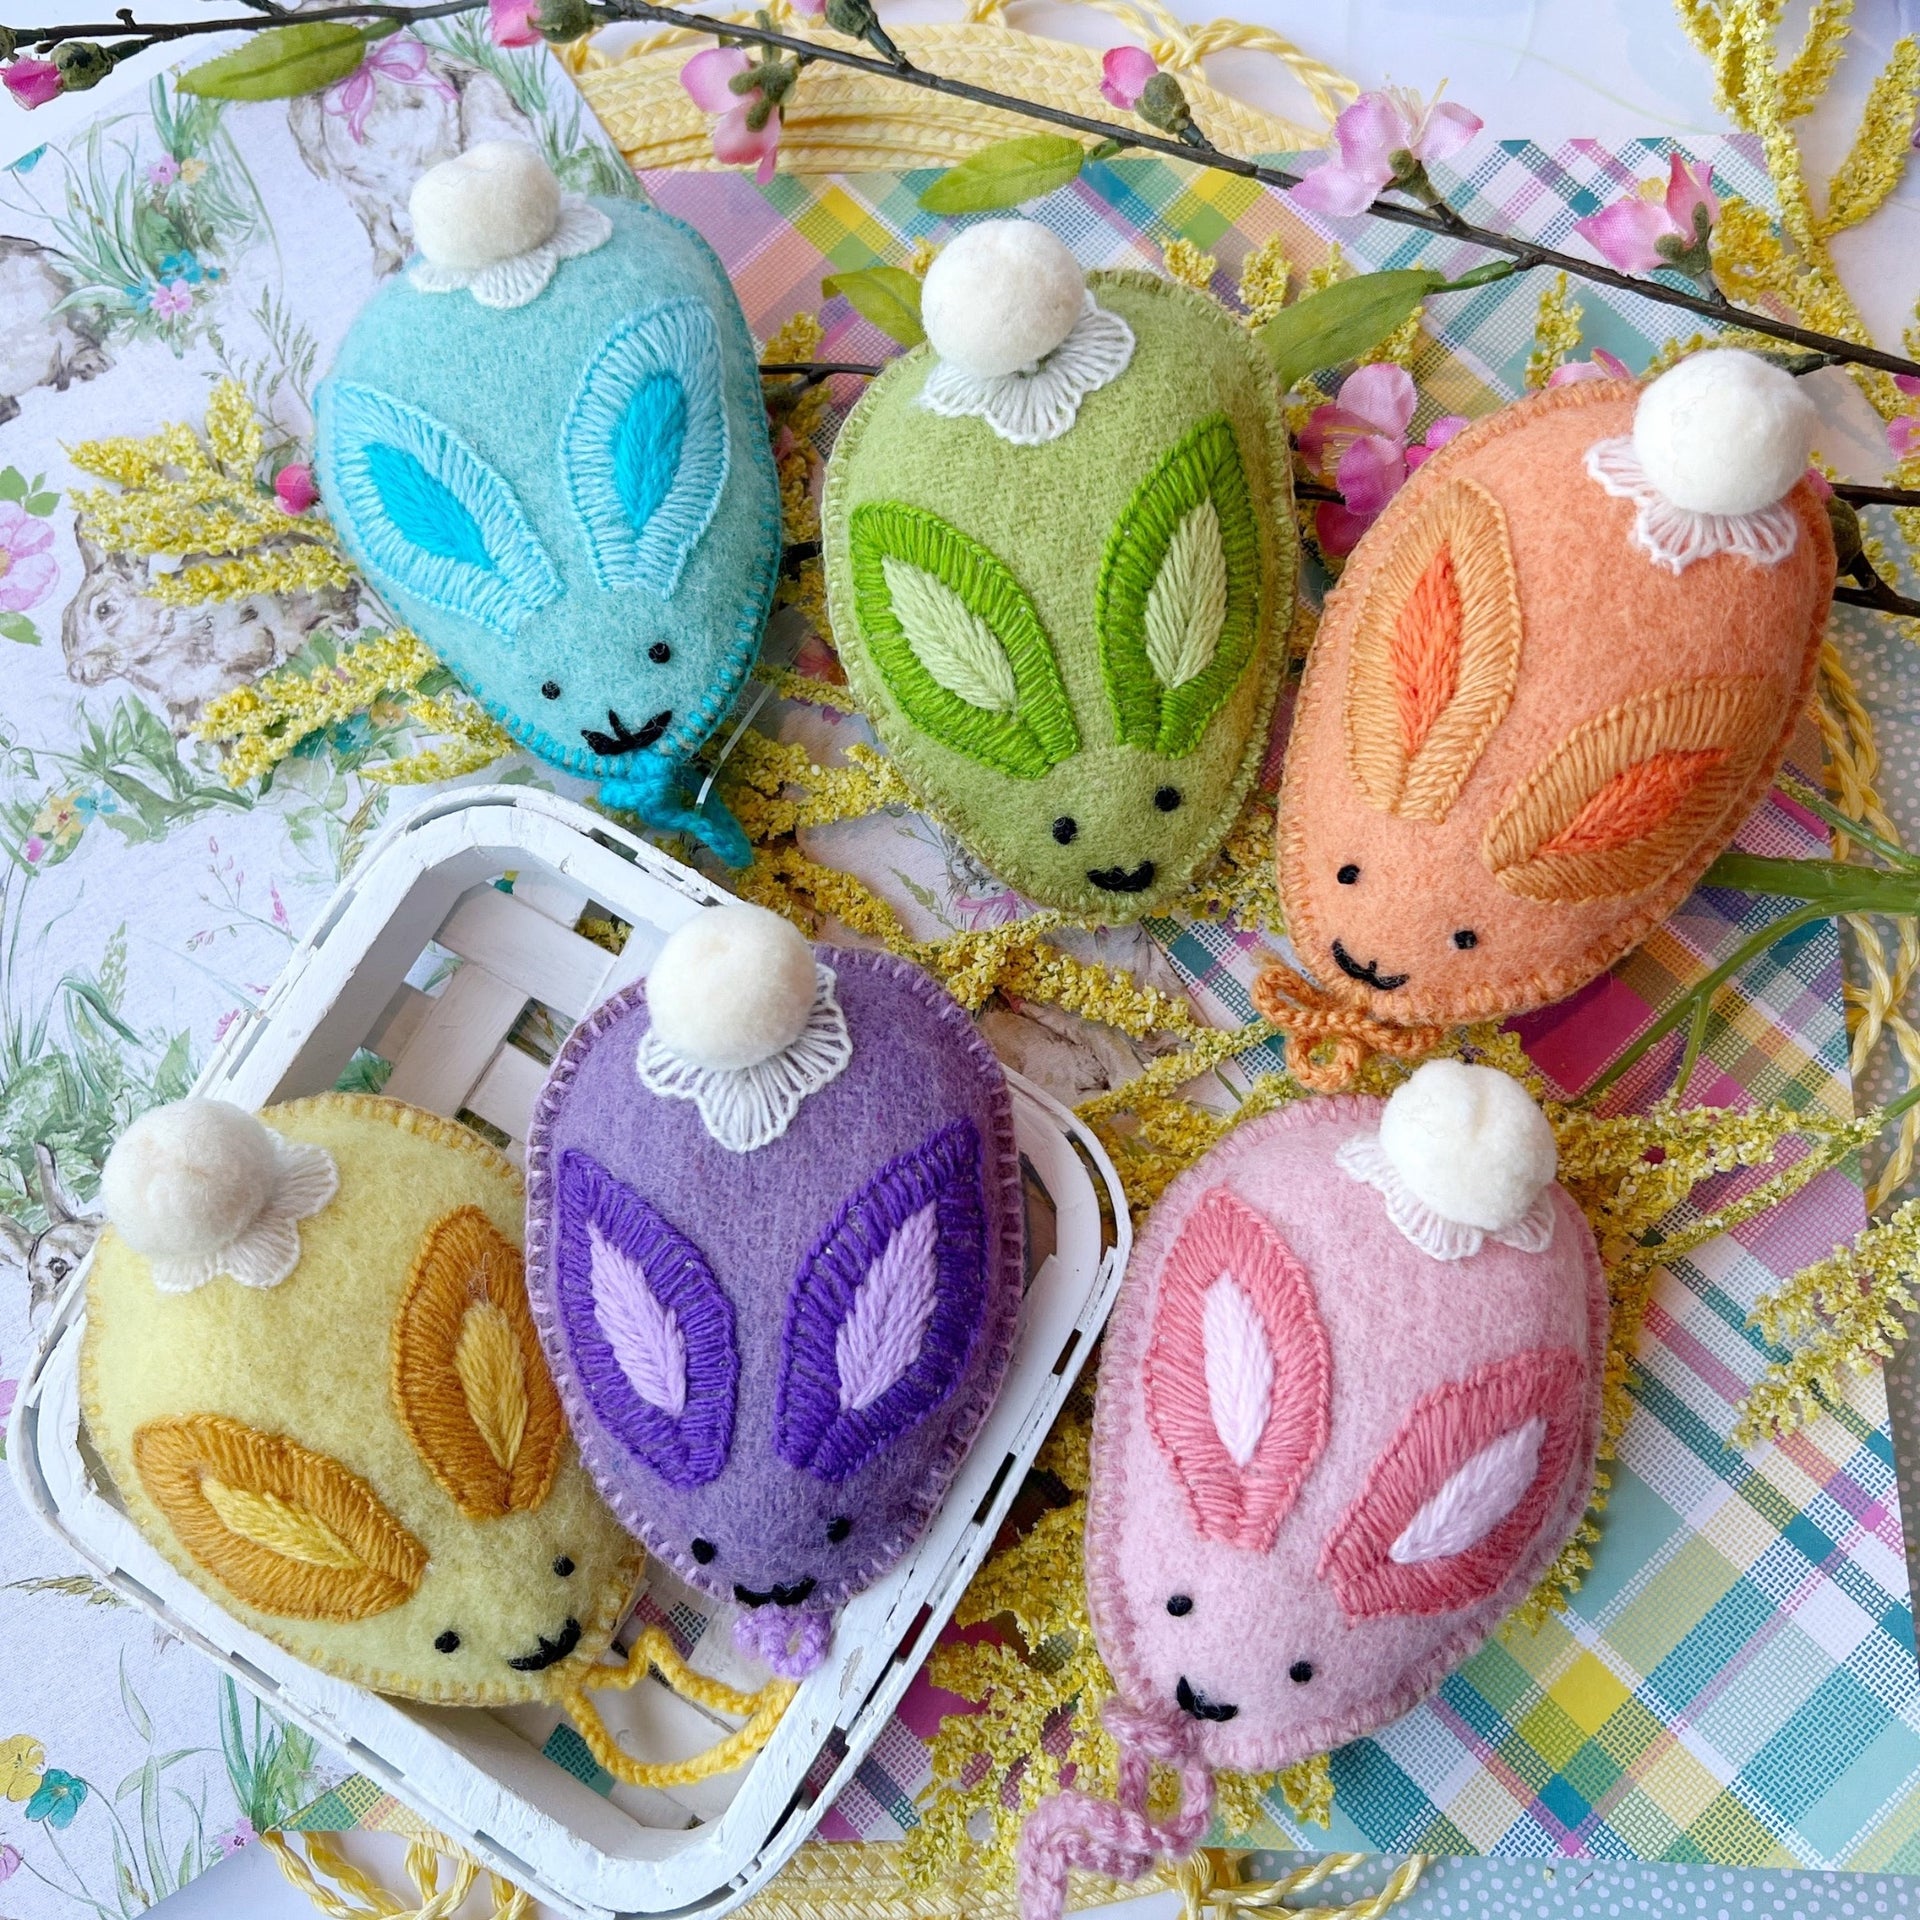 Colorful pastel bunny egg Easter ornaments styled together on spring background.